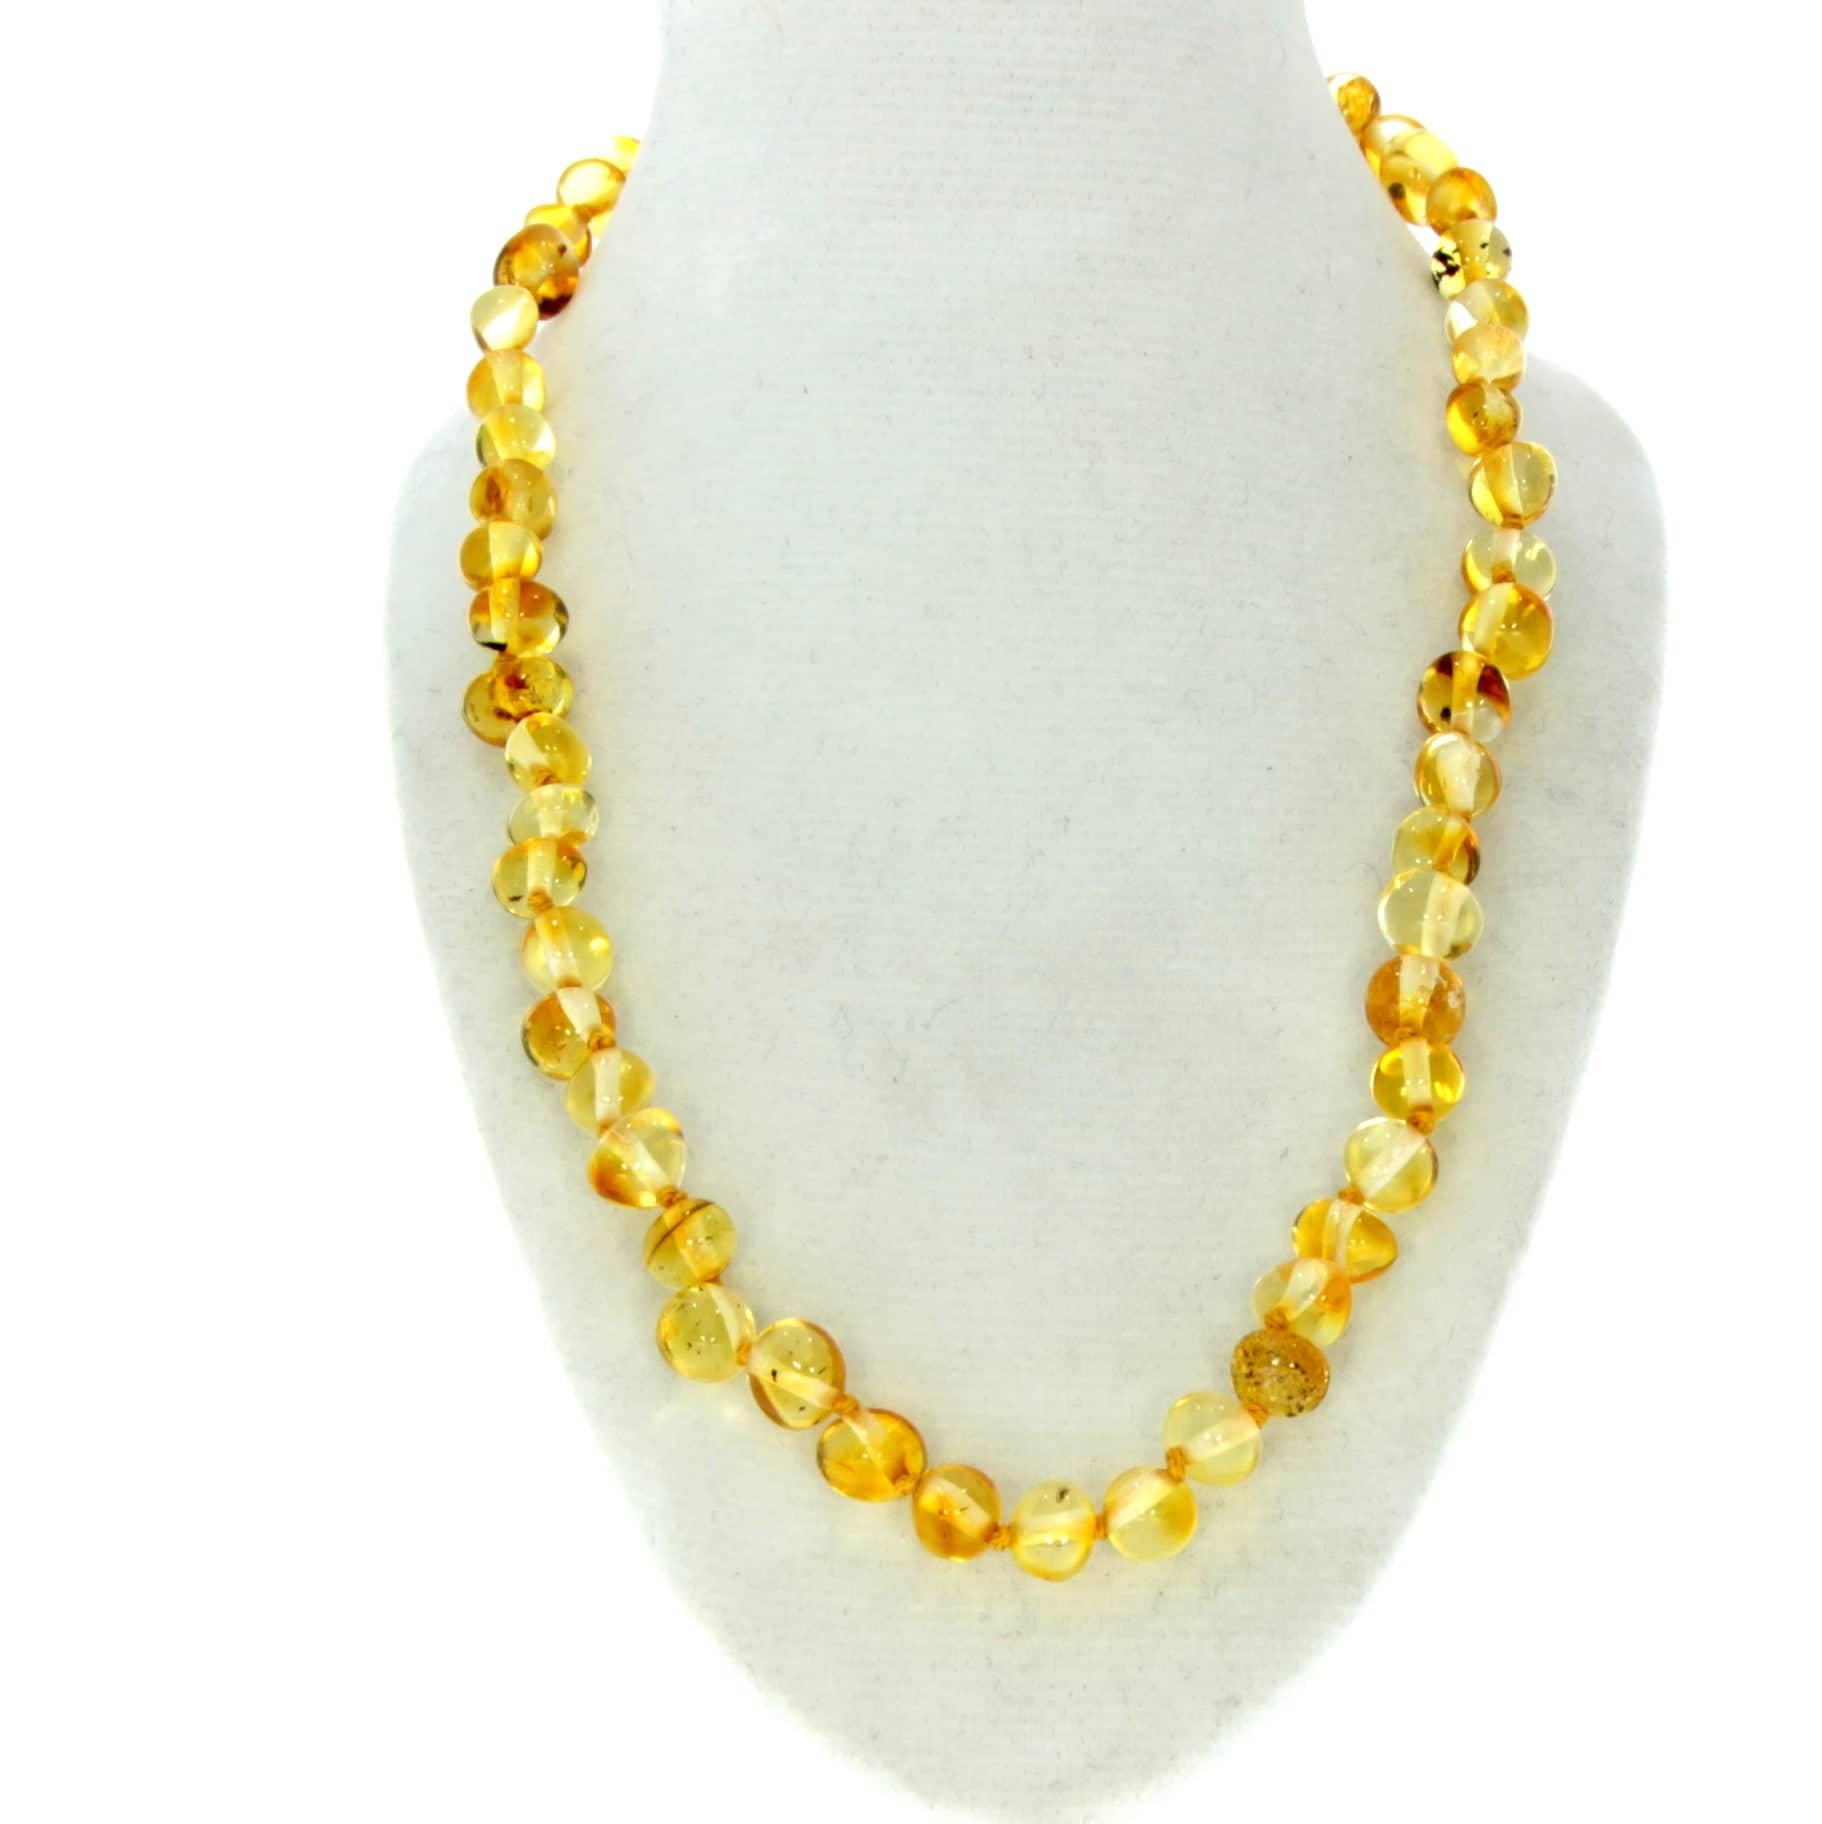 Genuine Baltic Amber Polished Baroque Beaded Necklace in various colours & sizes. All beads knotted in between.